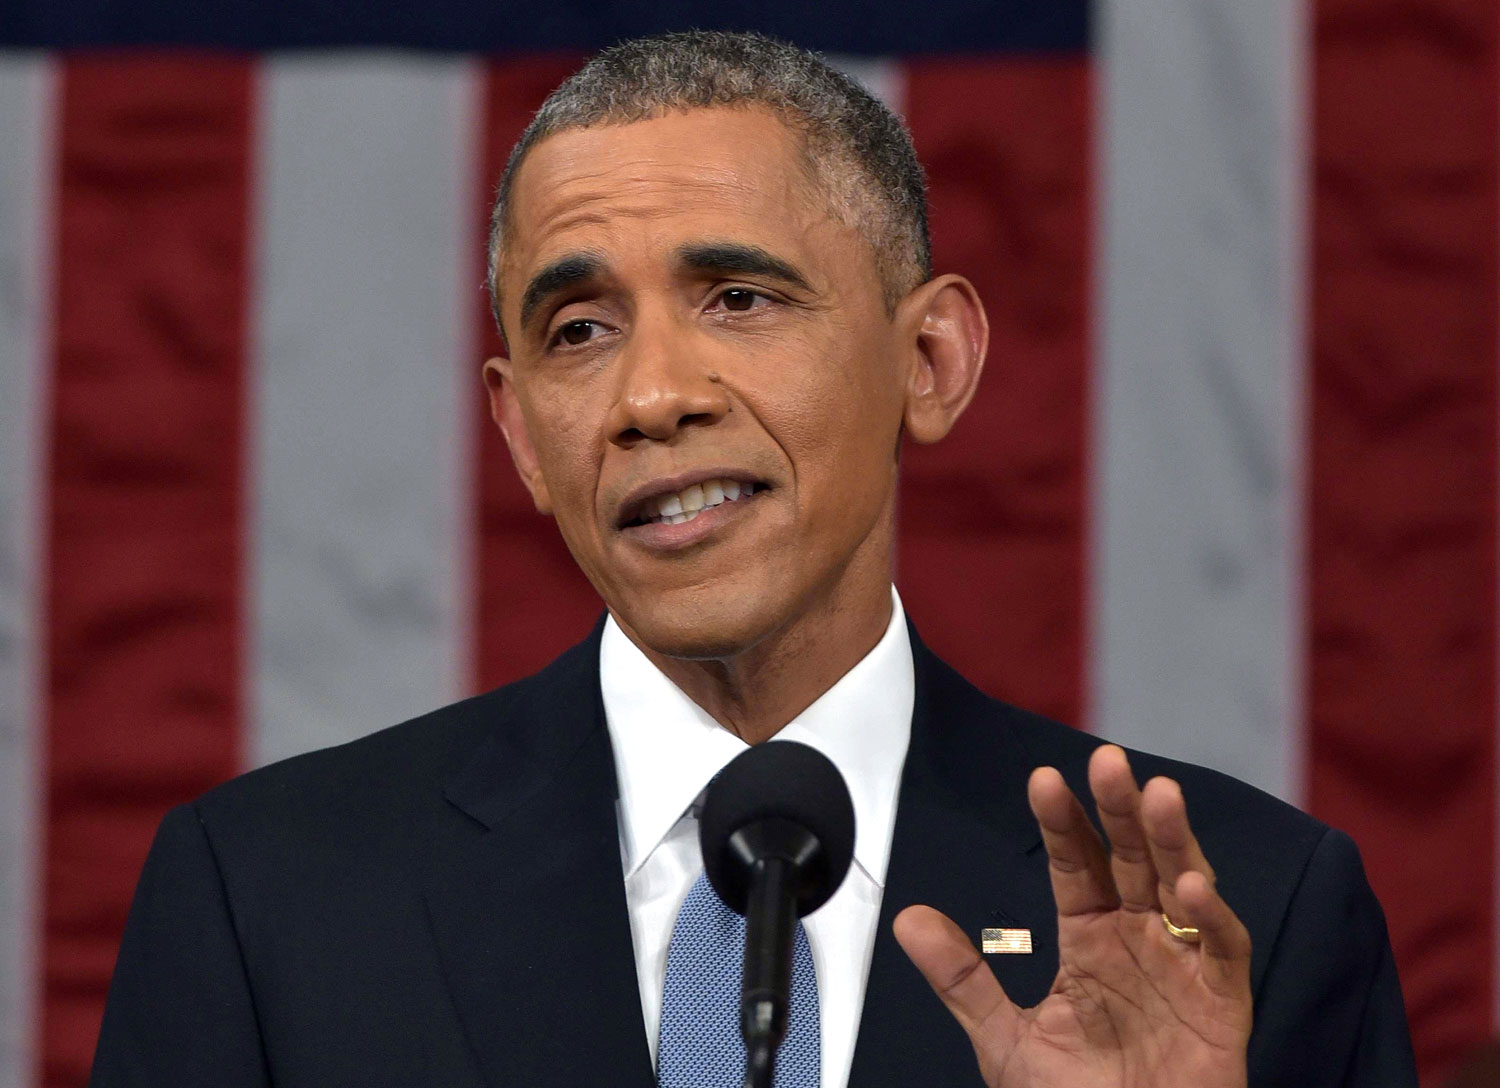 The Best Foreign Policy News From SOTU? No Iran Sanctions